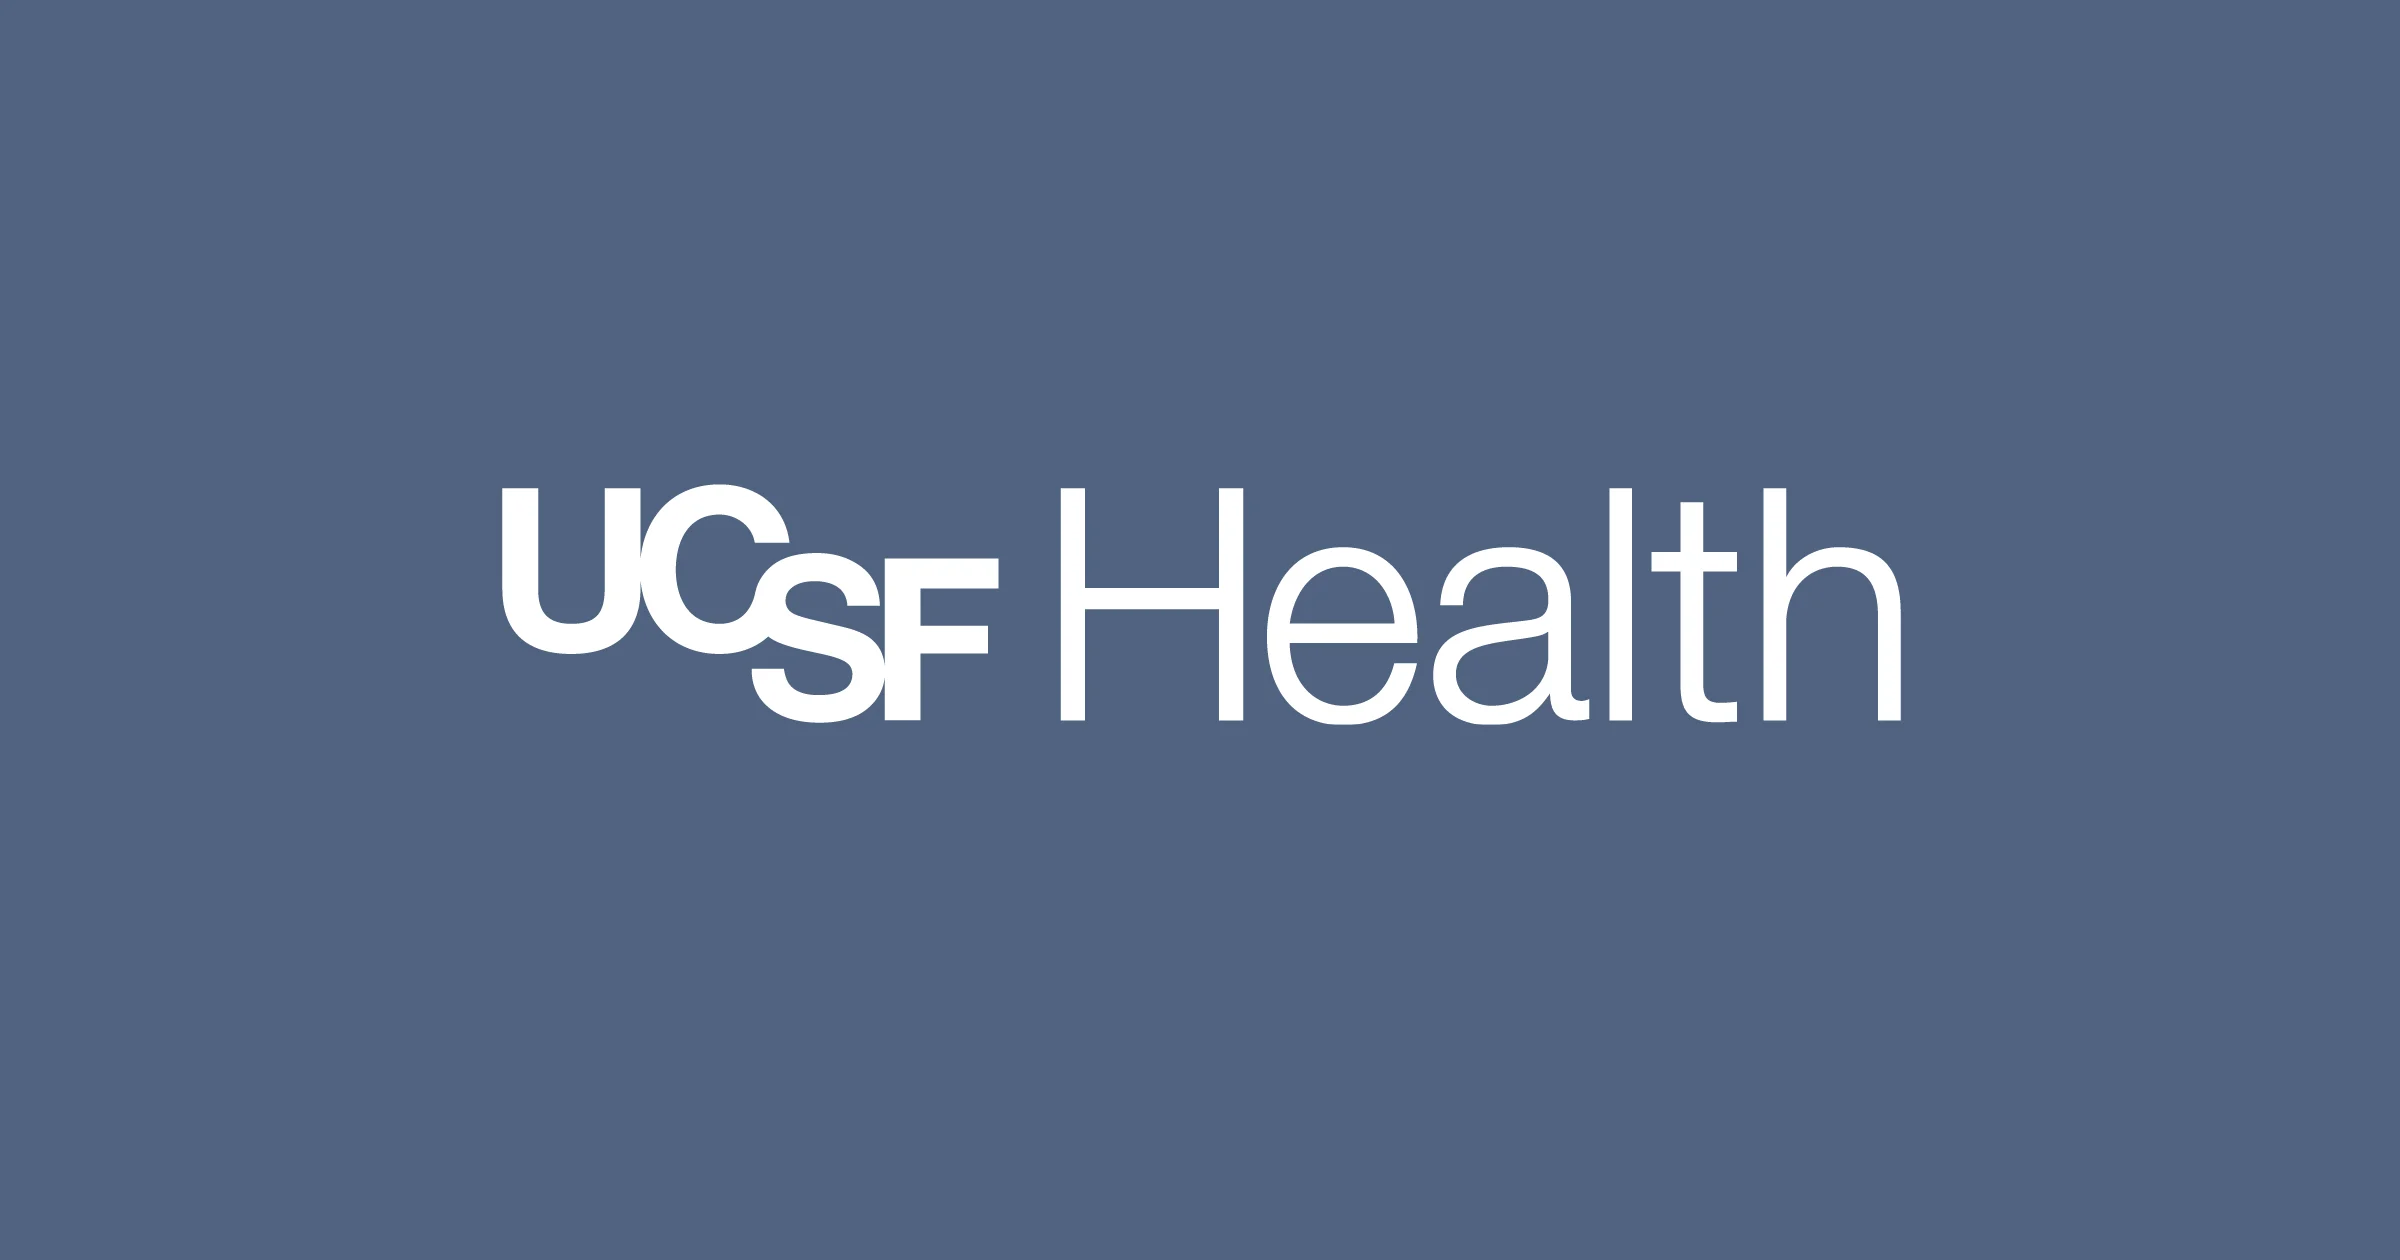 what is the mychart ucsf